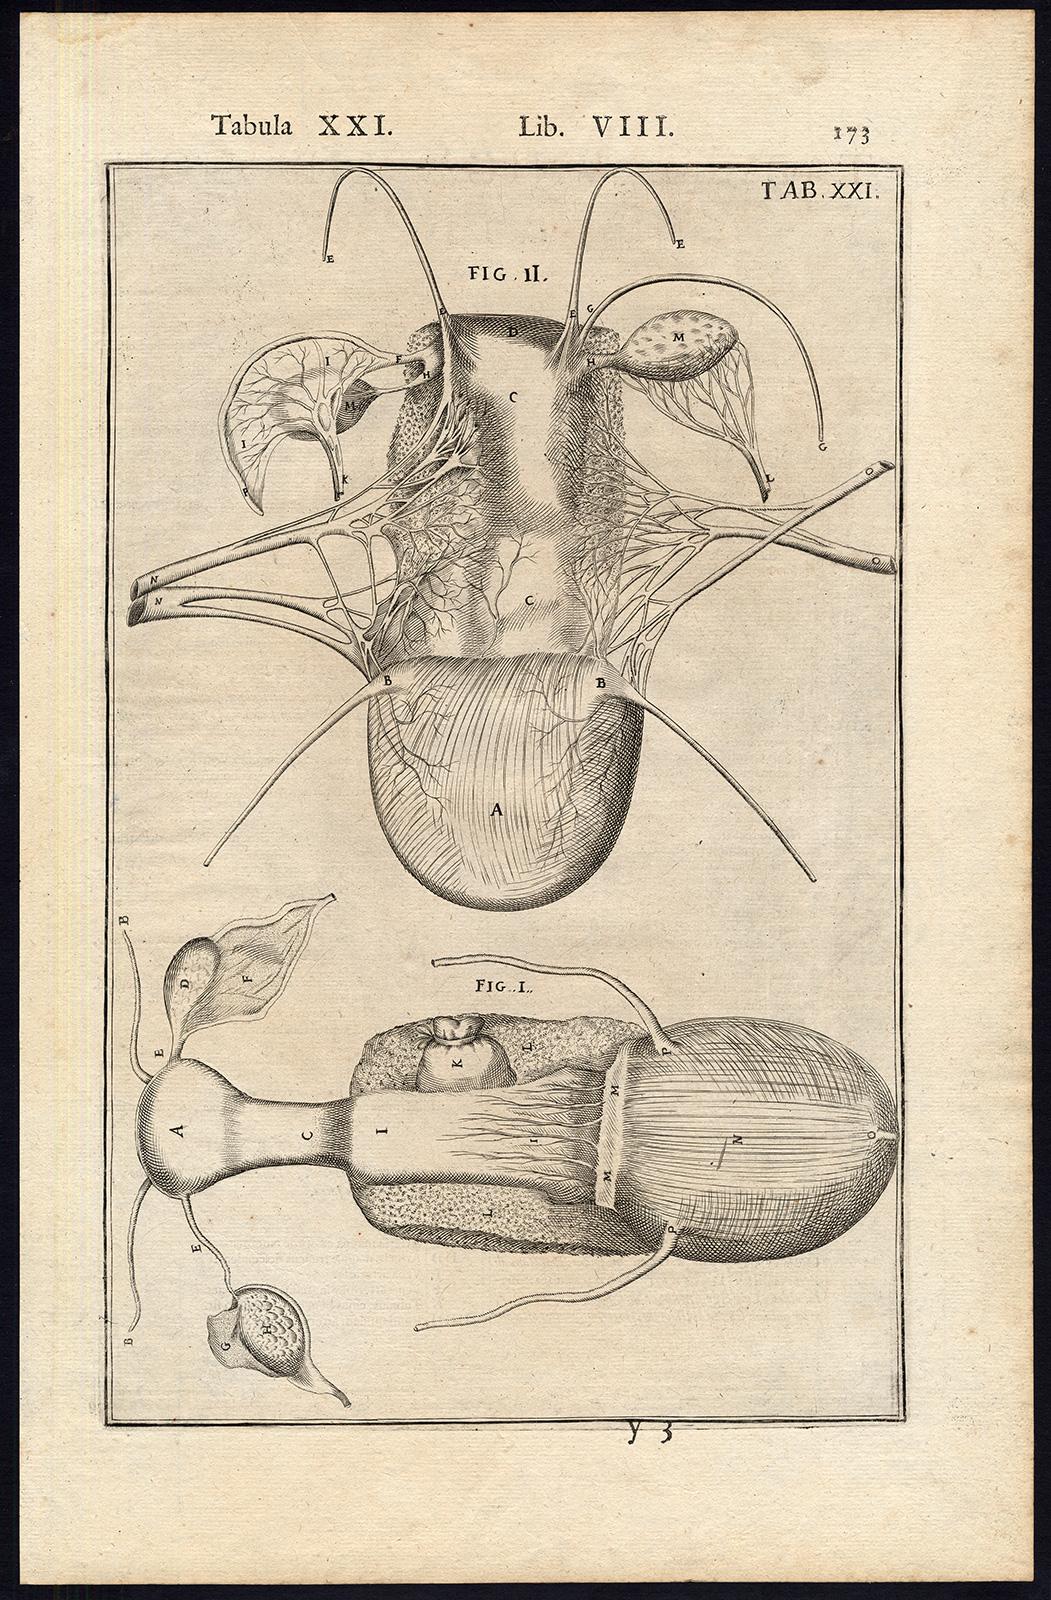 Subject: Very rare anatomical print. Plate, Lib. VIII, Tab. XX-XXI. Set of 2 plates, showing the female organs kidneys, bladder, spleen and womb. As the key to this plate(s) is on the rear of previous plate, as issued, a copy of this key  is